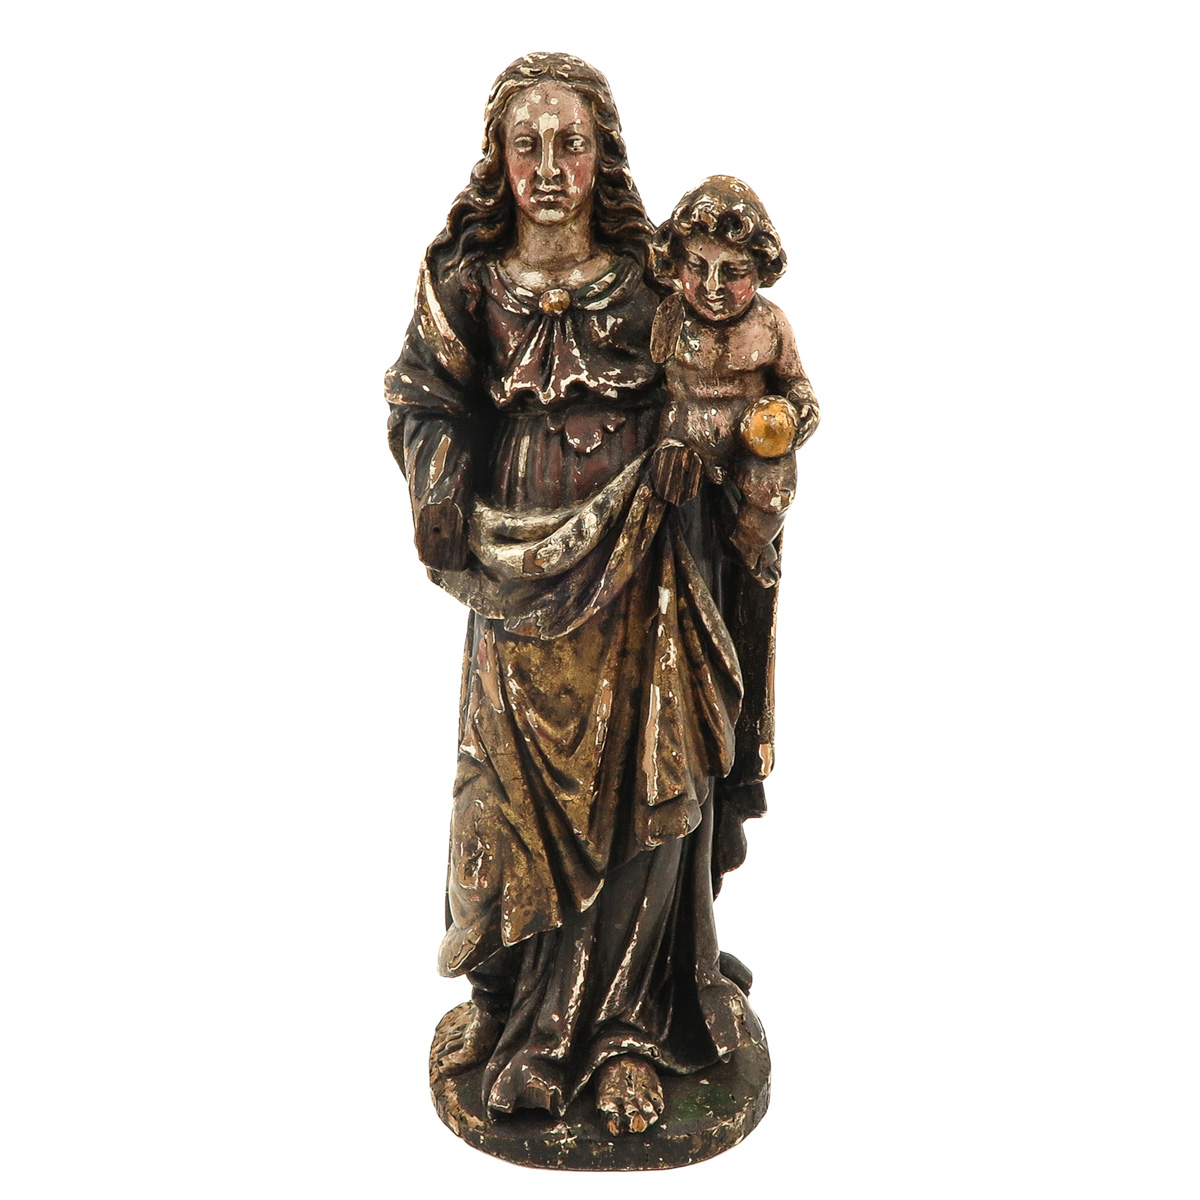 A Sculpture of Mary with Child